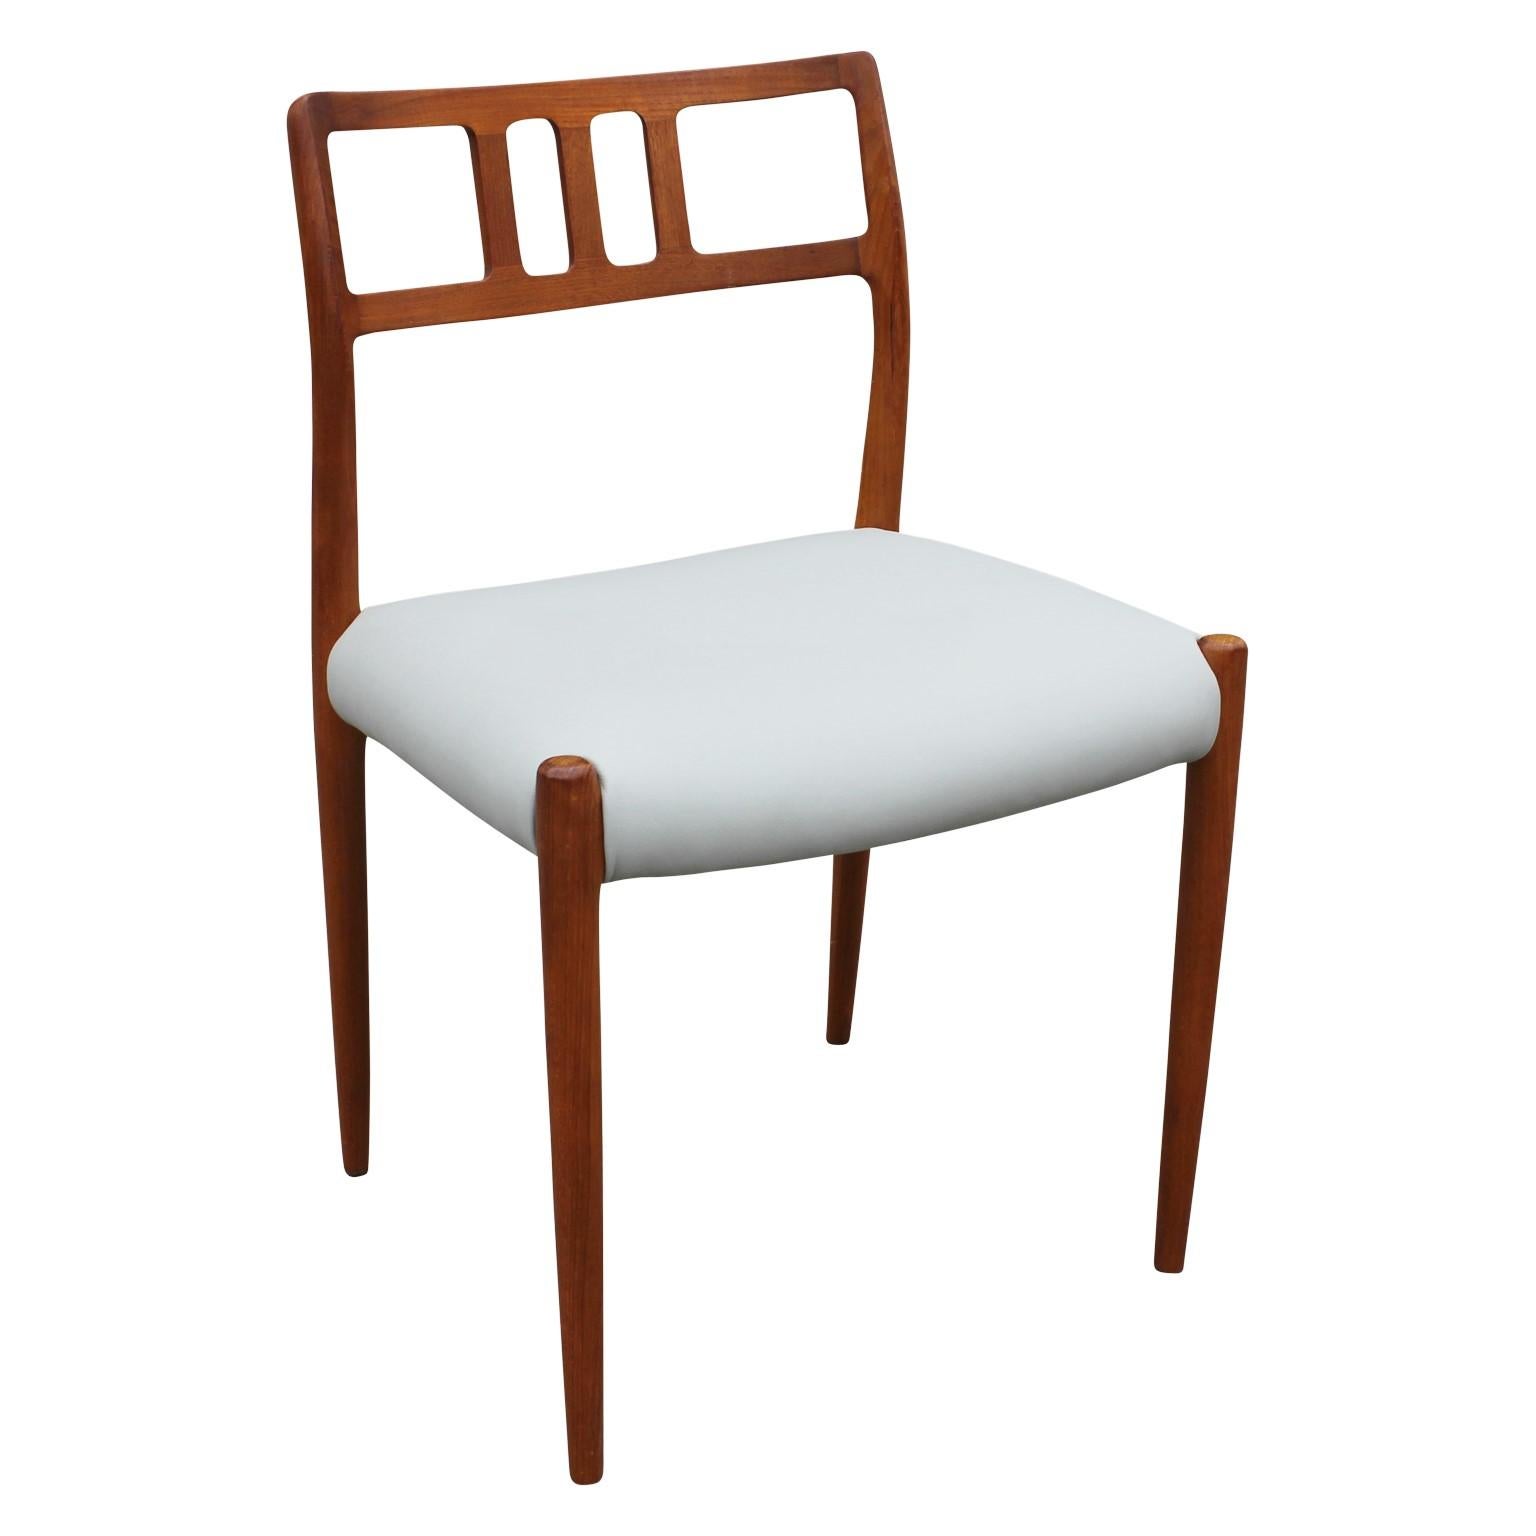 Mid-20th Century Set of Four Danish Teak Dining Chairs # 79 by J L Moller With Spinneybeck Seats